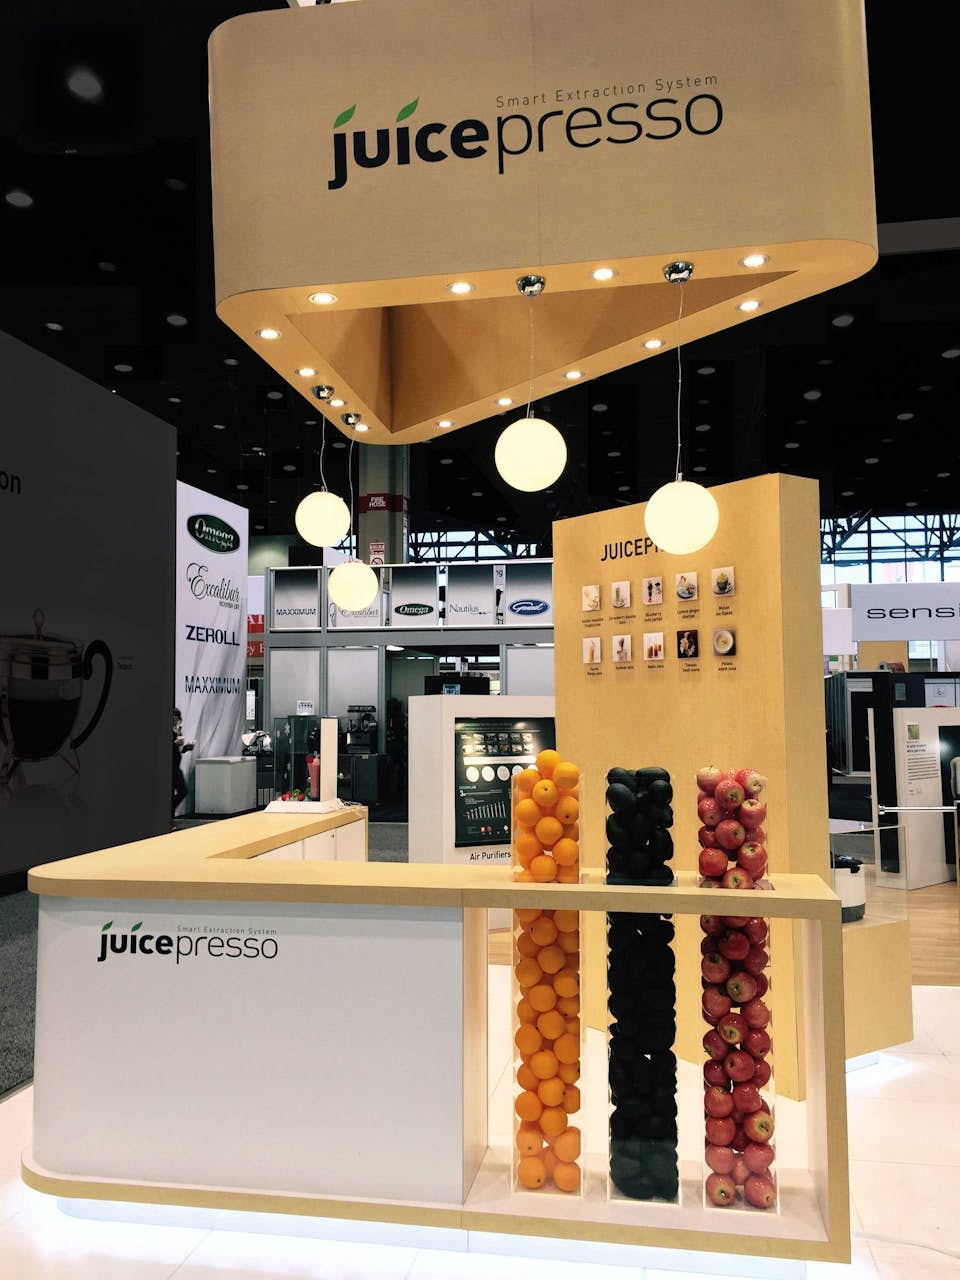 Coway Juicespresso live product demonstration at a trade show.